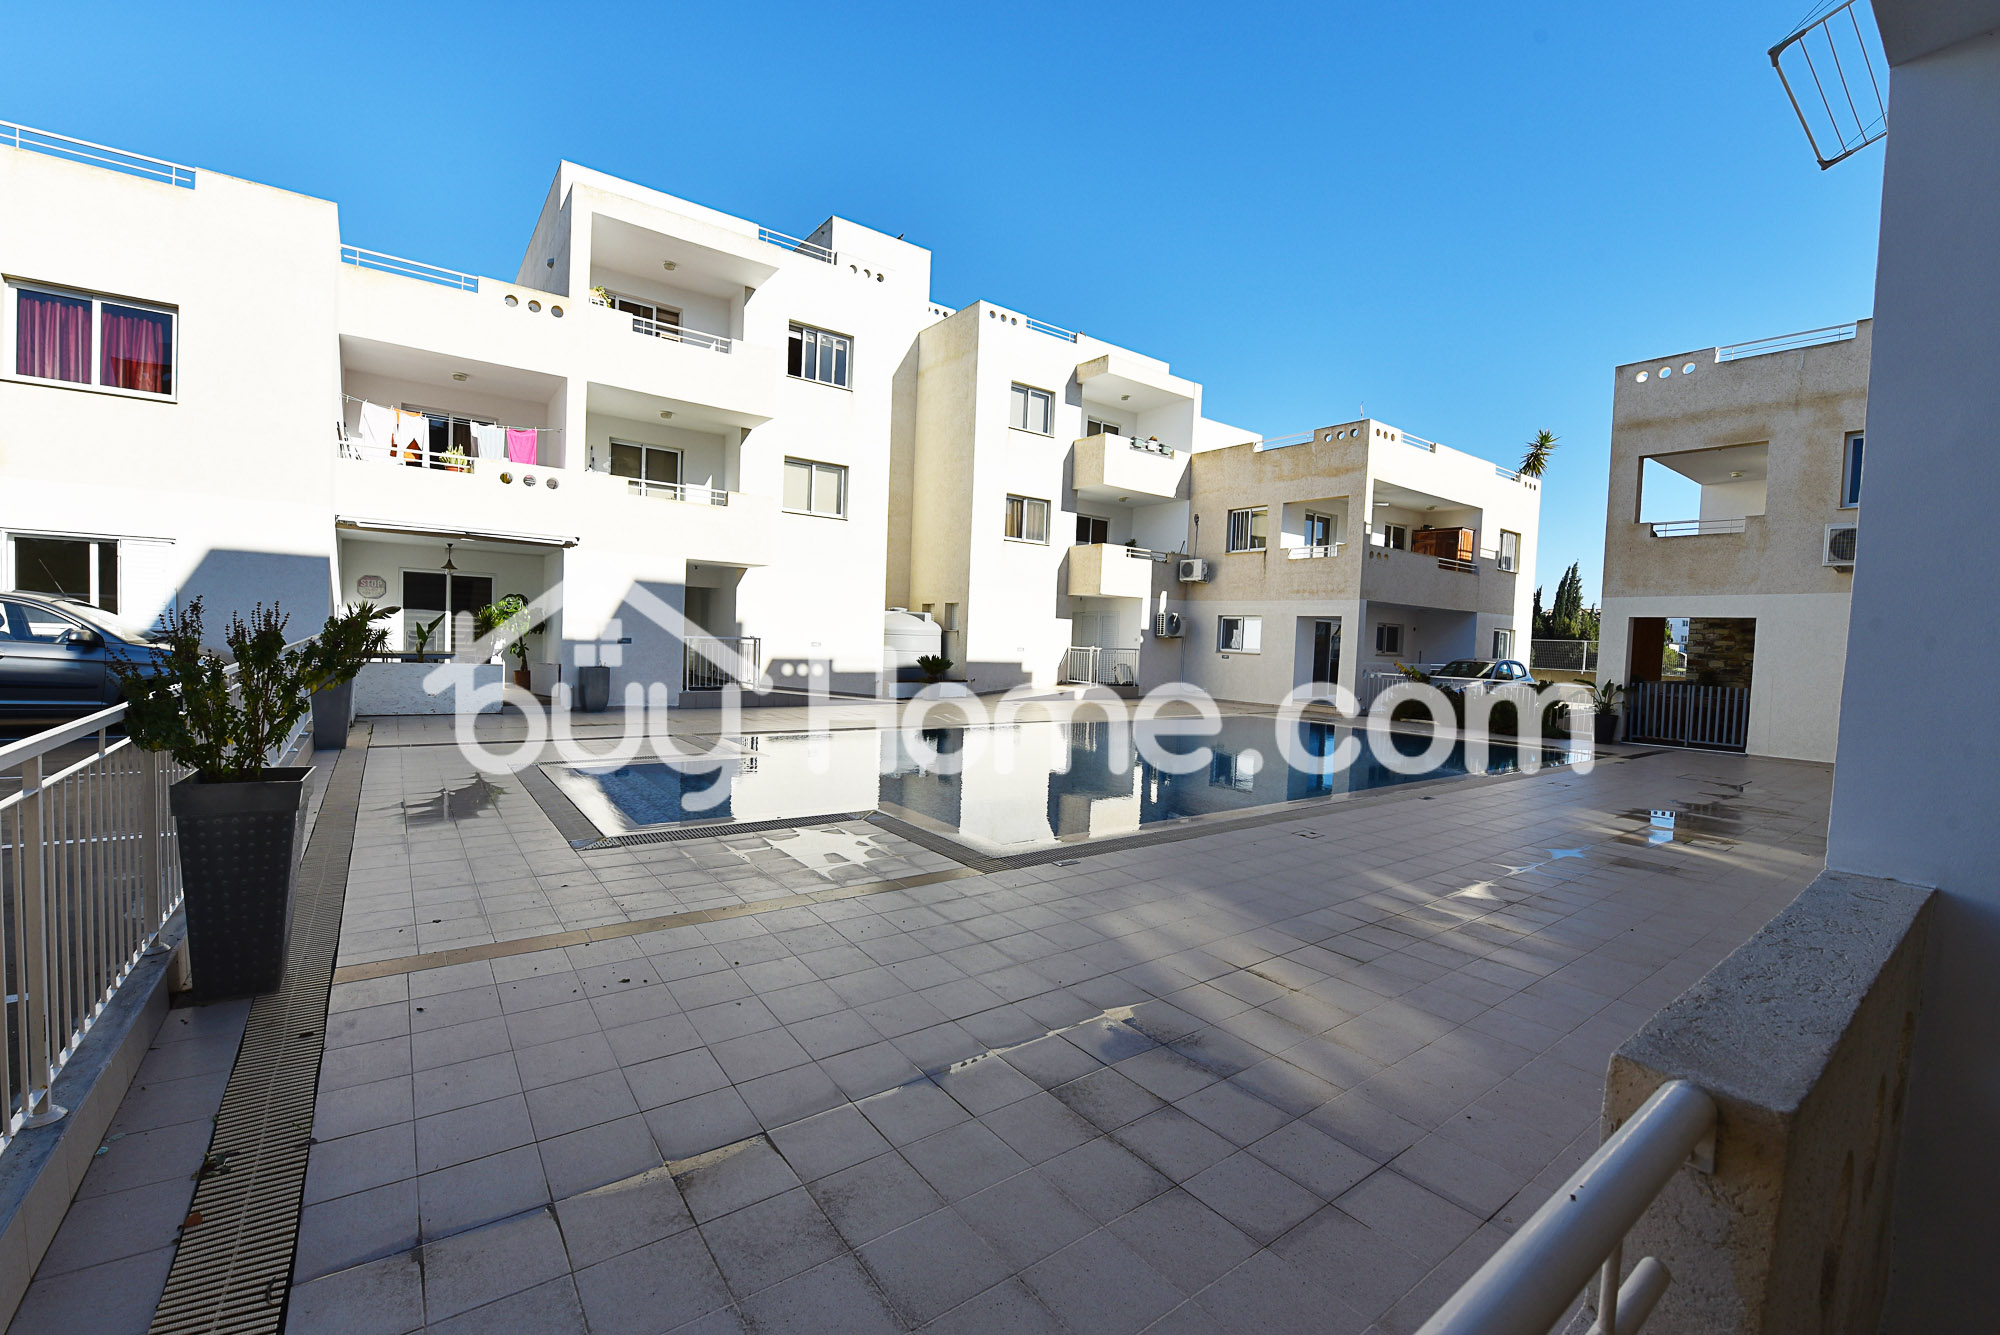 2 Bedroom Ground Floor Apartment with Pool | BuyHome